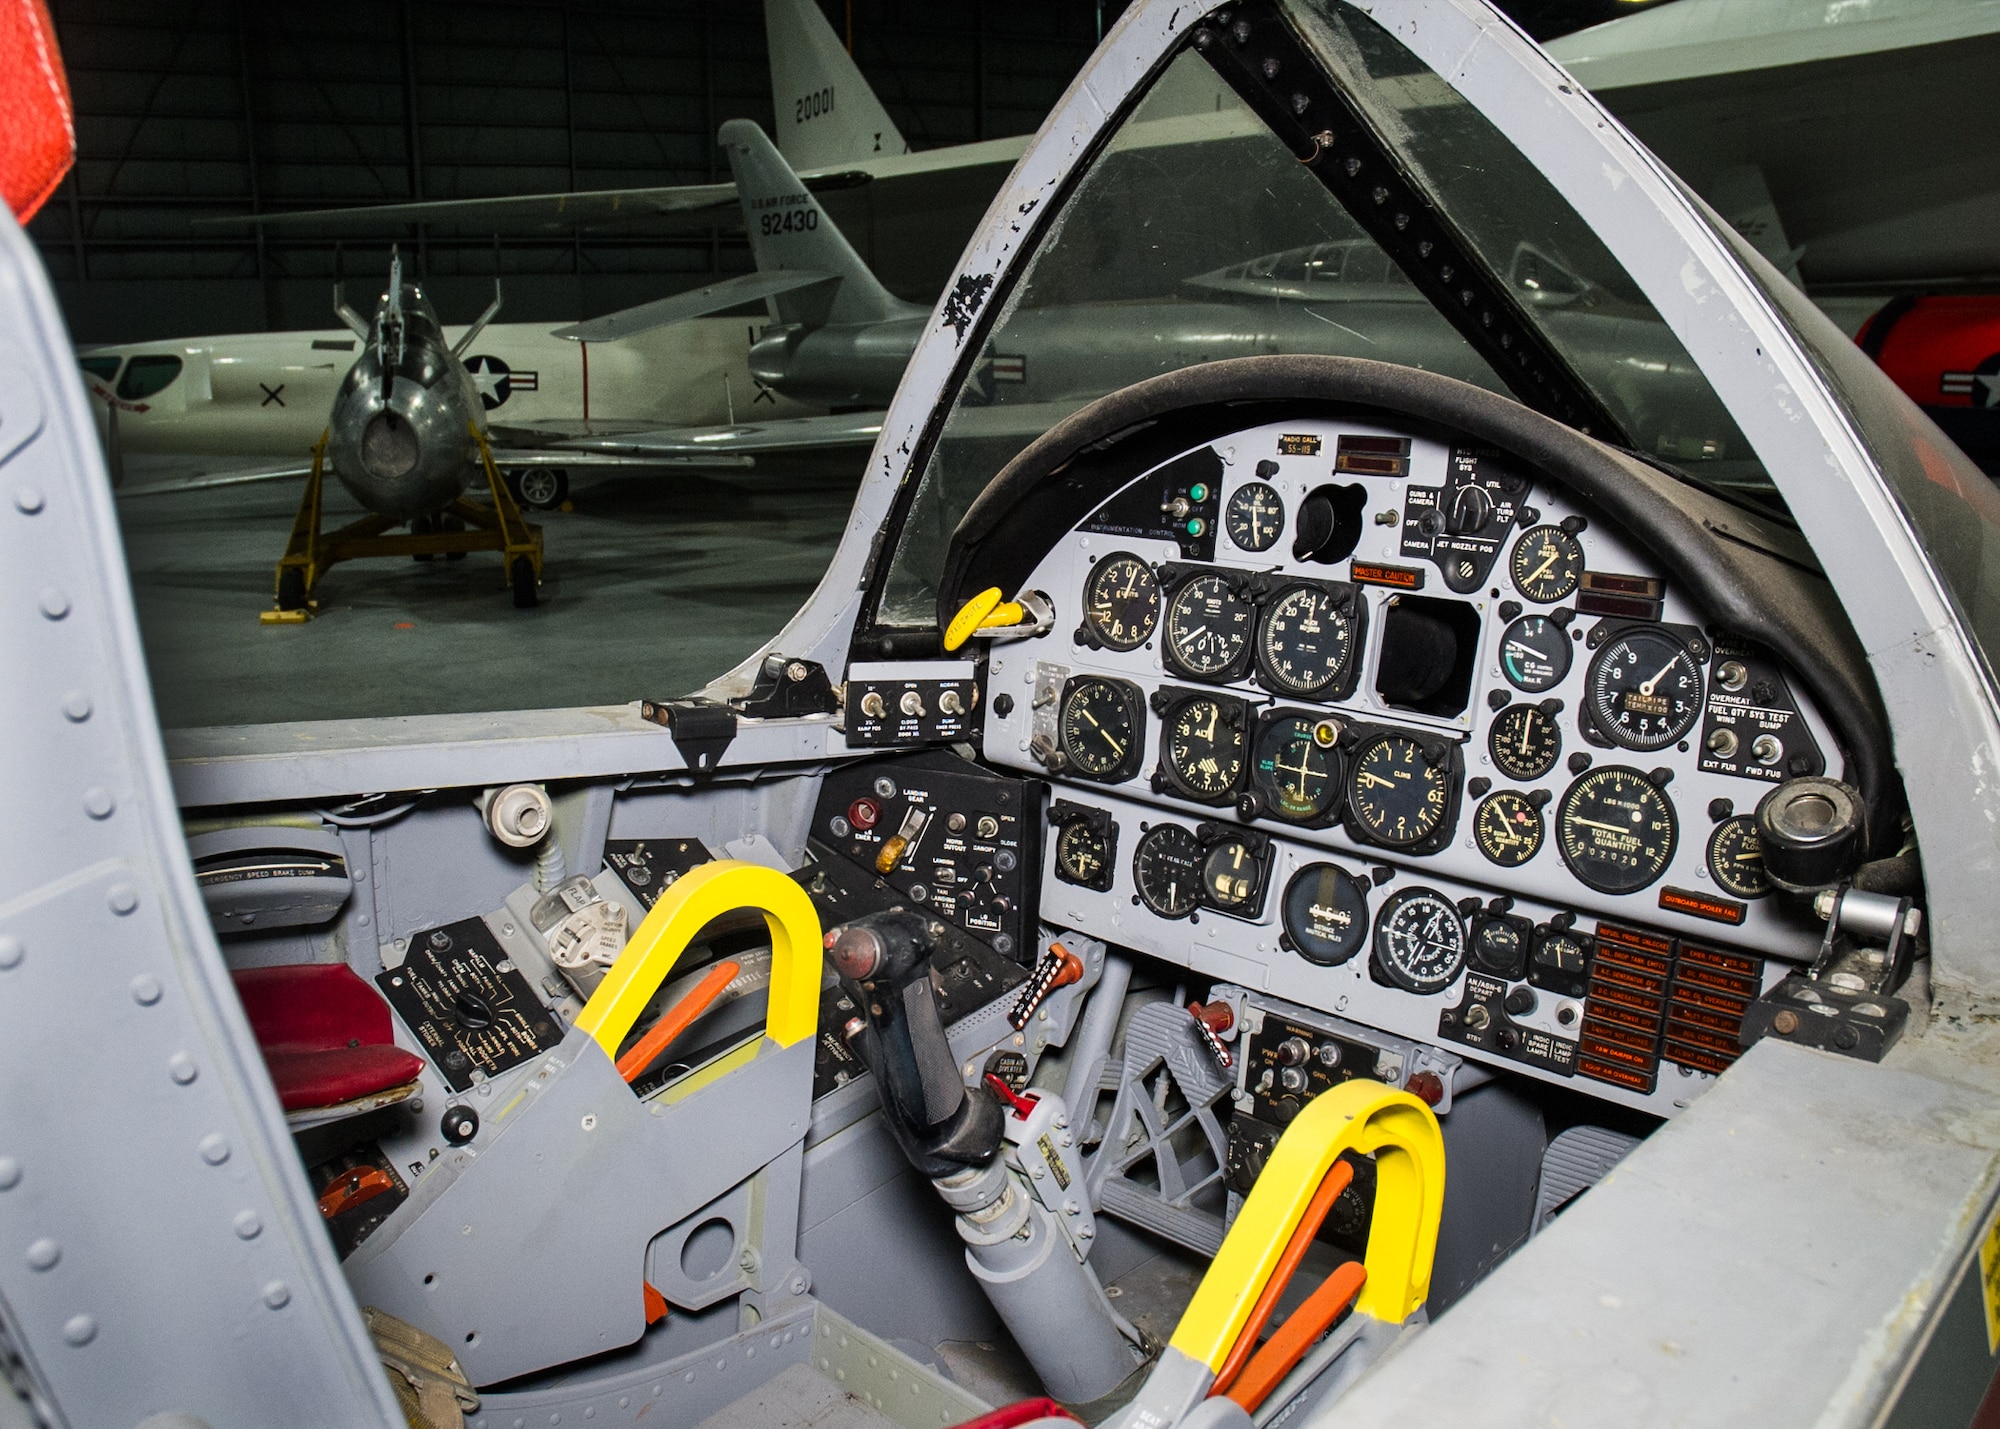 DAYTON, Ohio -- North American F-107A cockpit in the Research and Development Gallery at the National Museum of the United States Air Force. (U.S. Air Force photo by Ken LaRock)